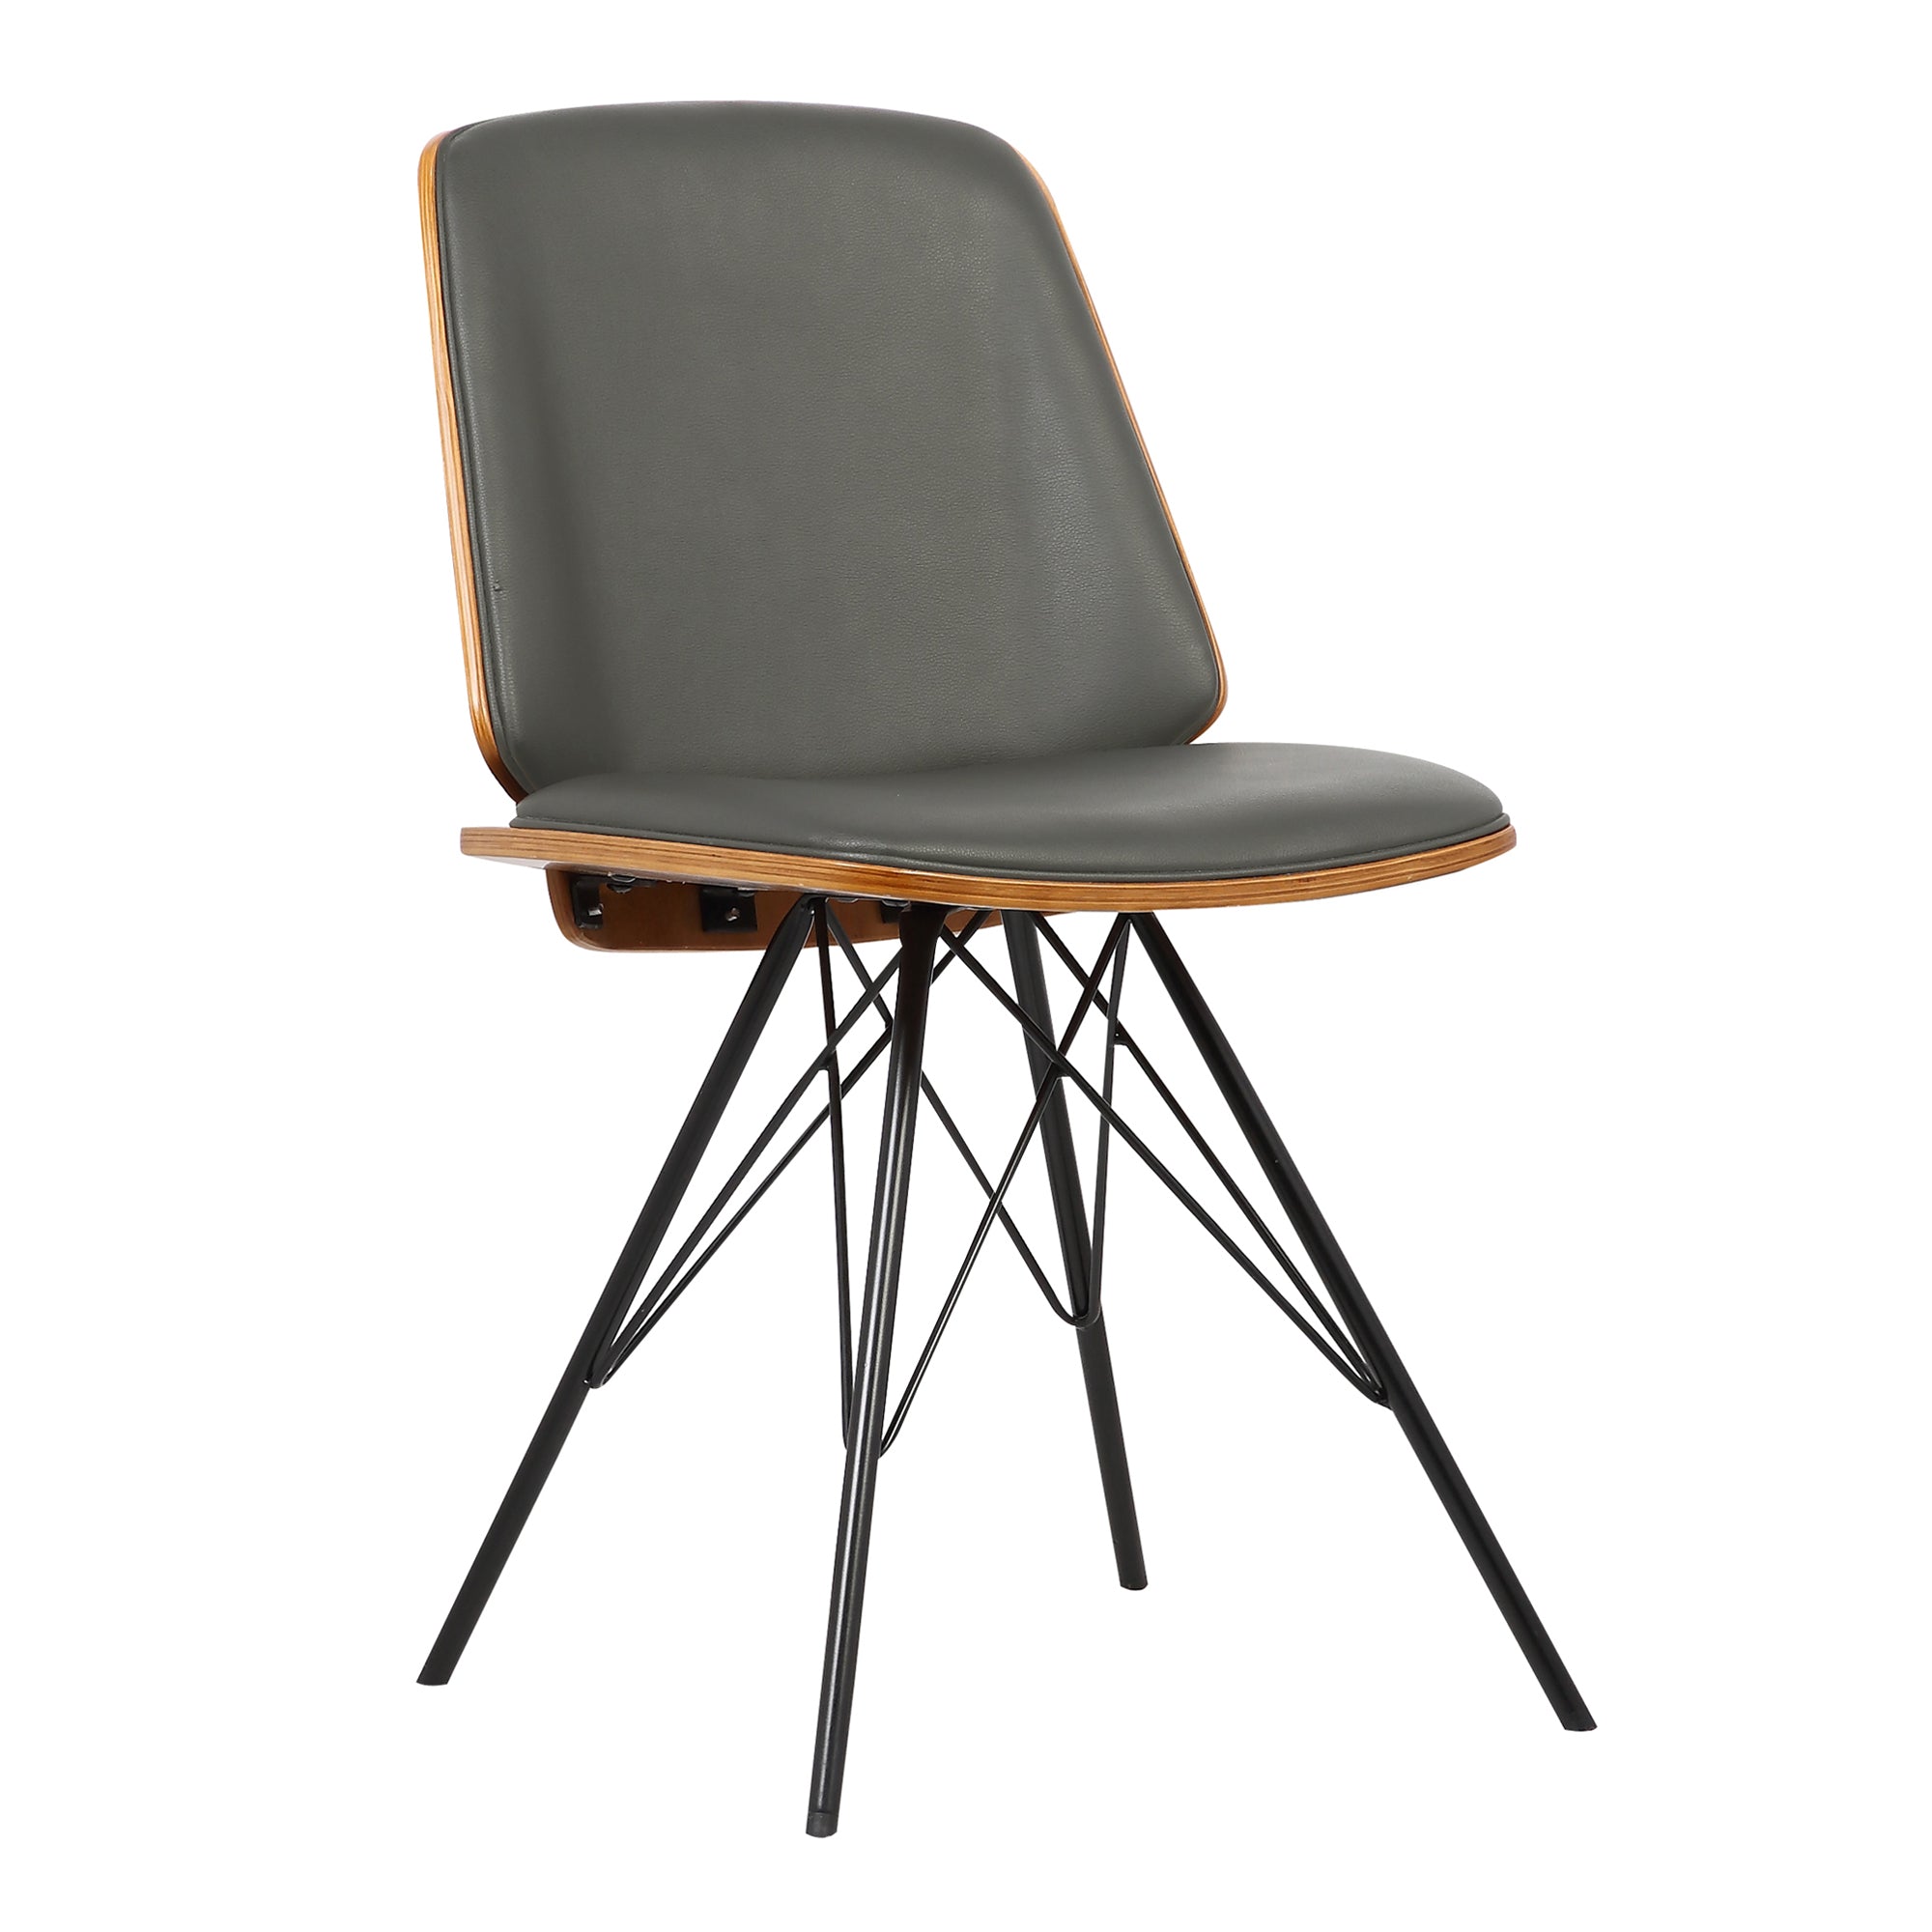 Armen Living Lcinchwagrey Inez Mid-century Dining Chair In Gray Faux Leather With Black Powder Coated Metal Legs And Walnut Veneer Back